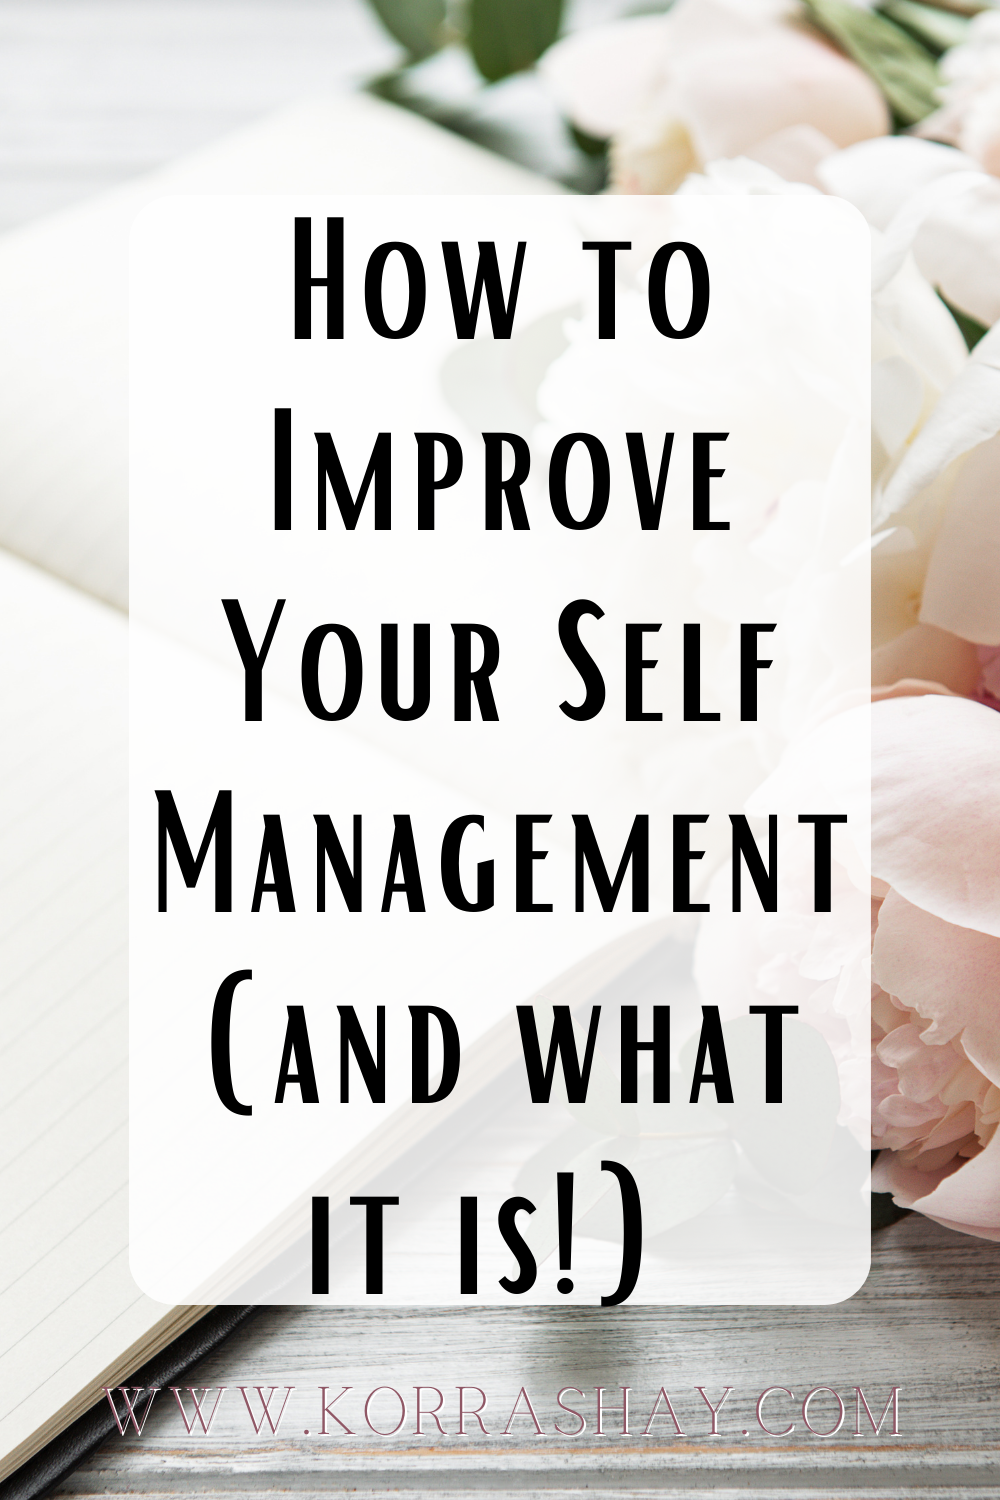 How to Improve Your Self Management (and what it is!) 